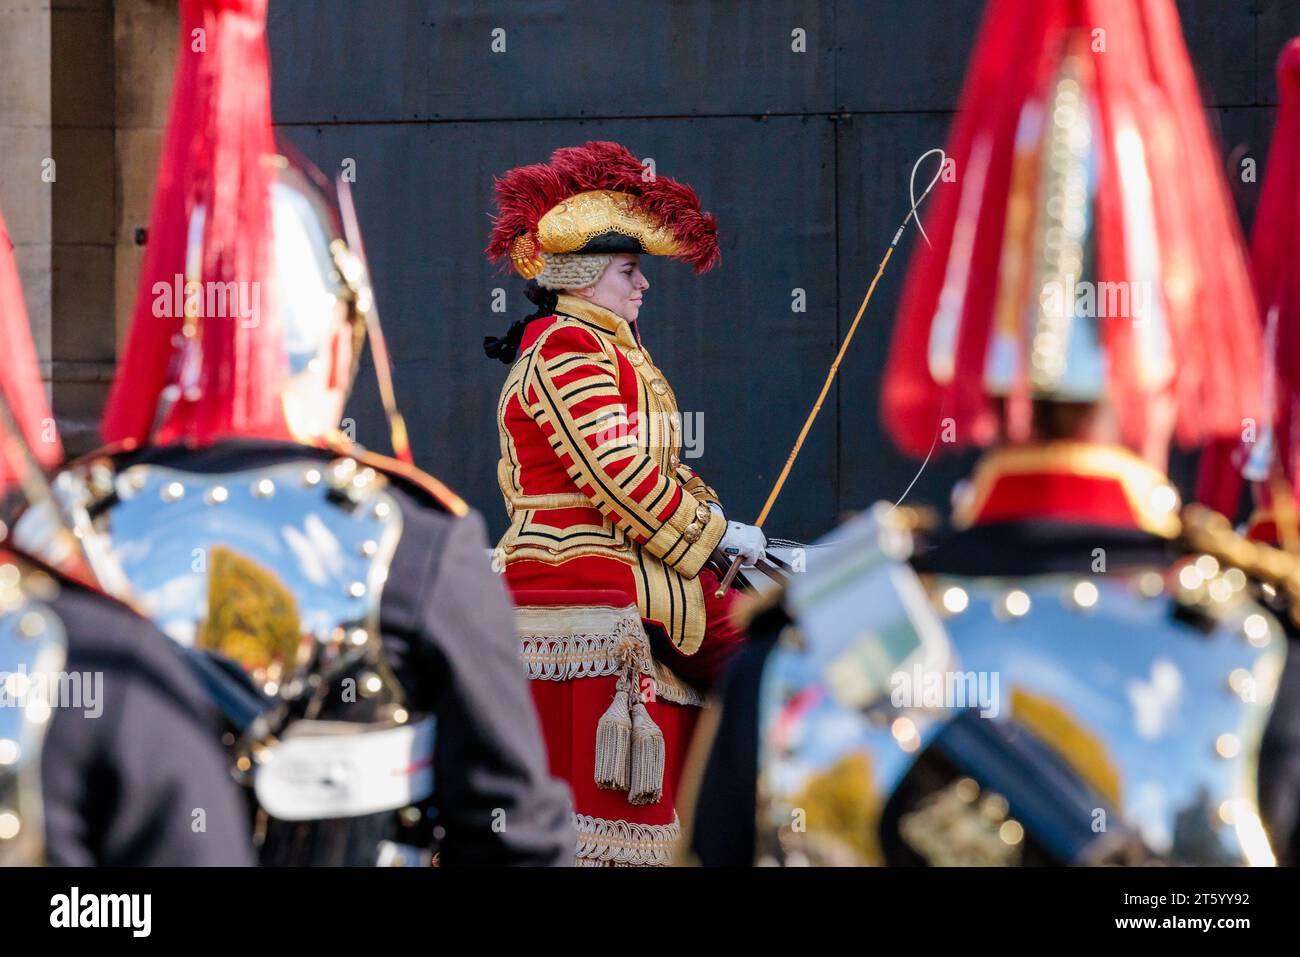 Westminster, London, UK. 7th November 2023. Military in ceremonial uniform ahead of His Majesty King Charles III arrival at the Palace of Westminster for the State opening of Parliament. It will be His Majesty's first King's Speech since becoming Monarch. Photo by Amanda Rose/Alamy Live News Stock Photo